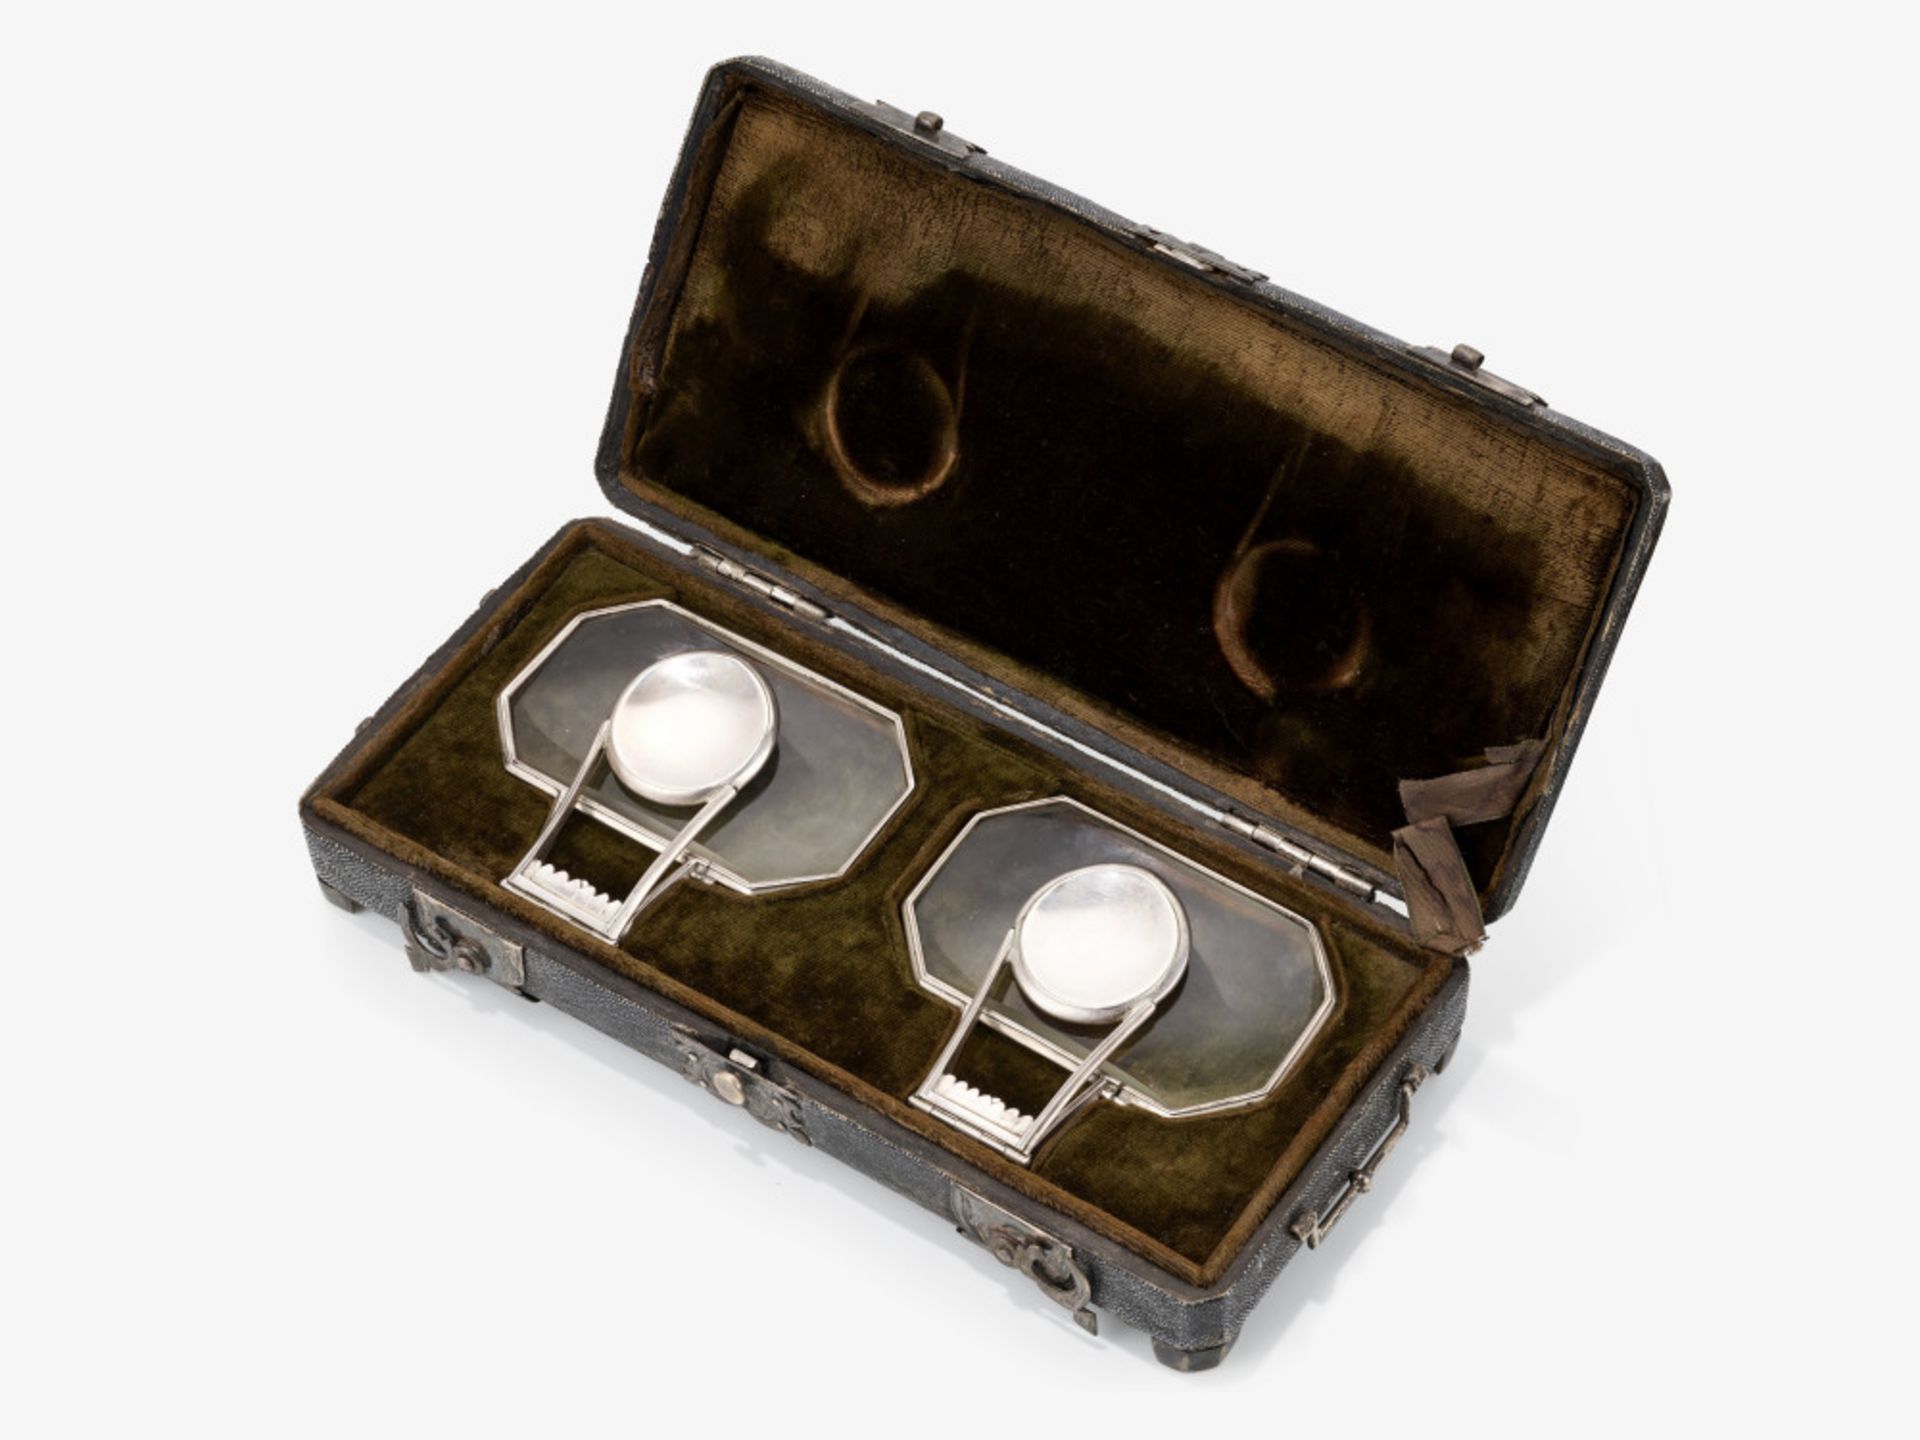 Magnifier set consisting of two hand-held magnifiers - Late 19th century 